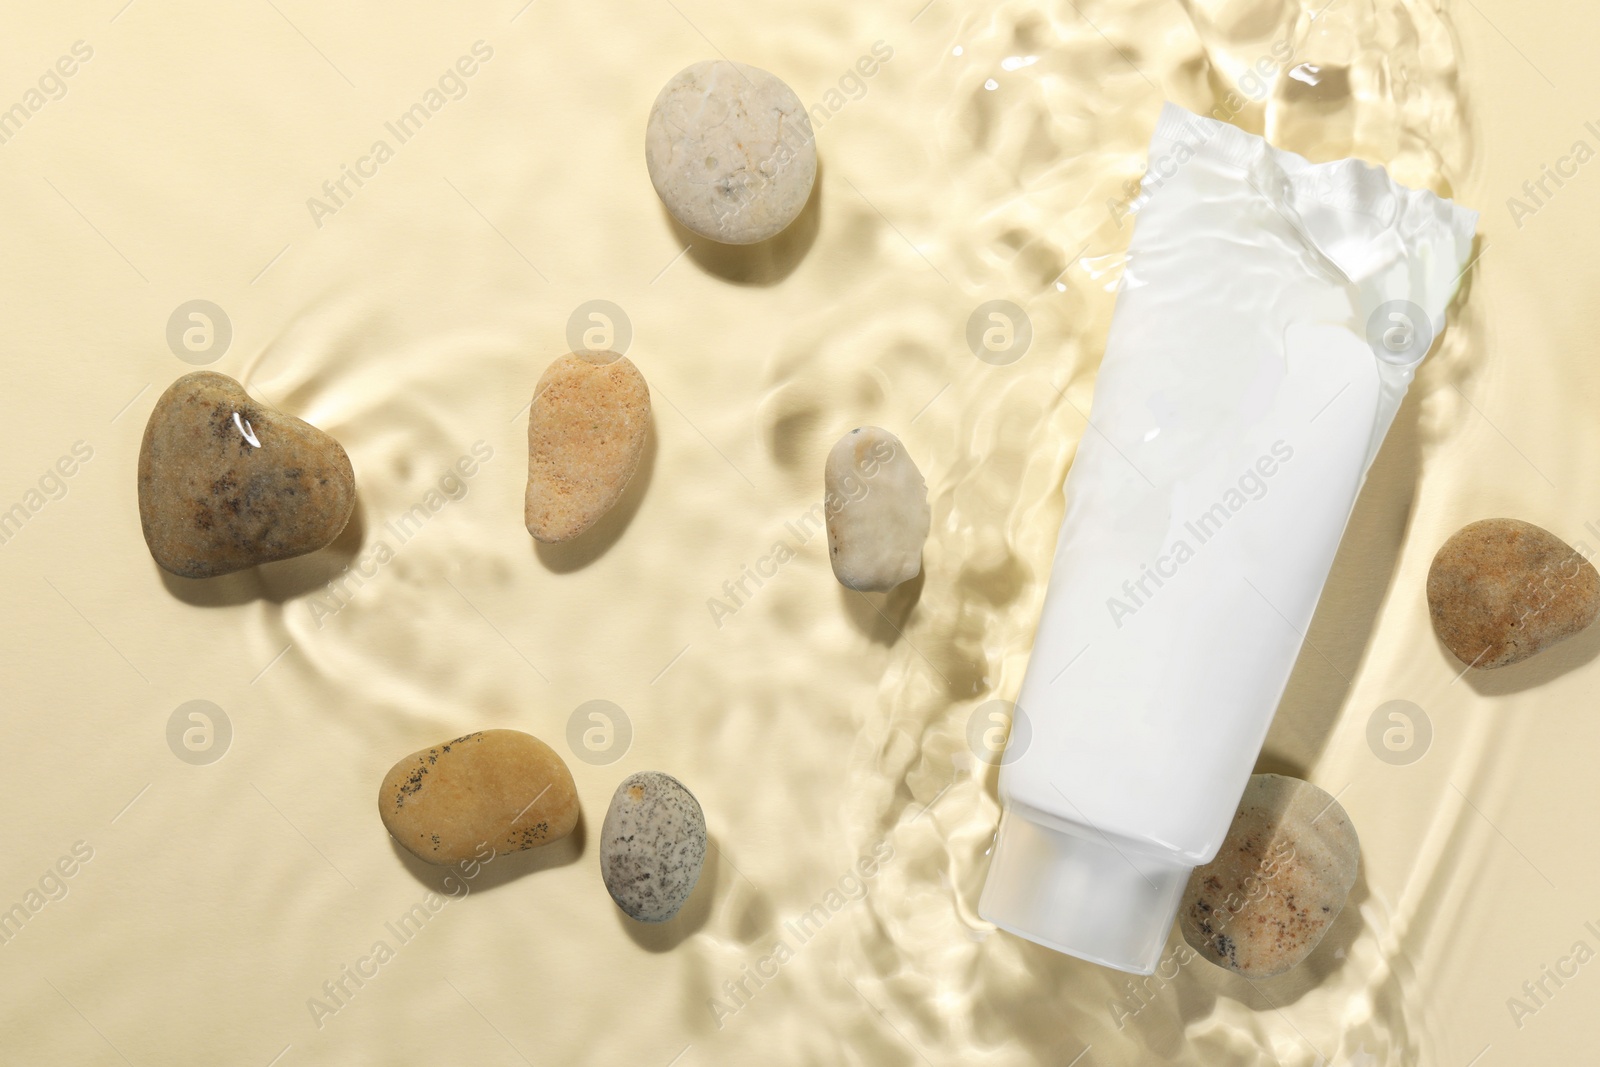 Photo of Tube of face cleansing product and stones in water against beige background, flat lay